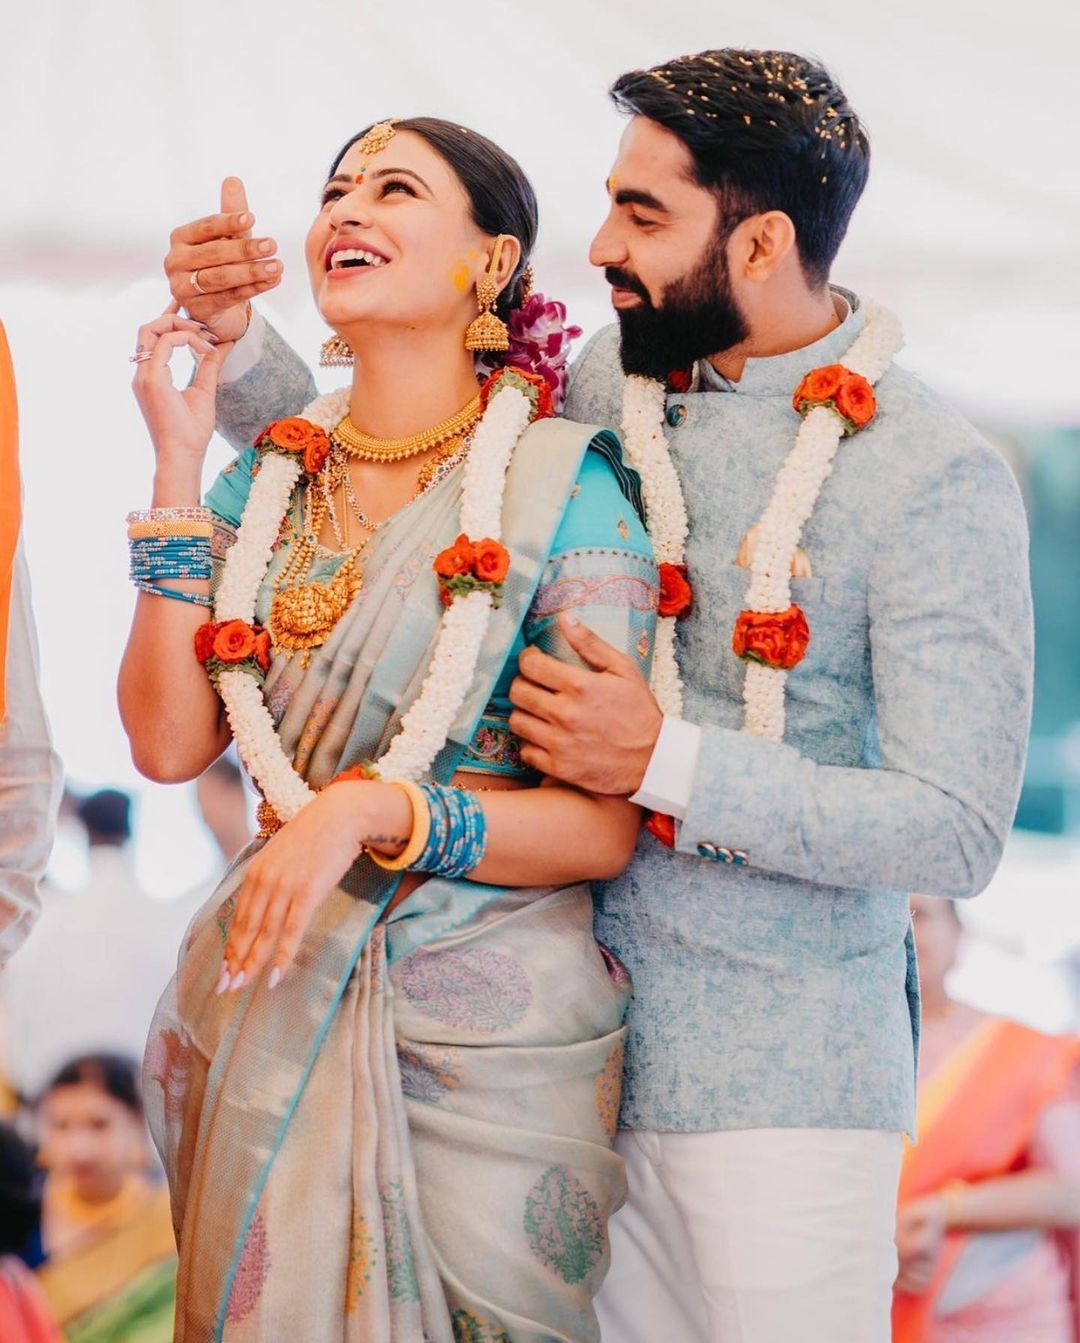 This is one bride who stole our heart with her pastel saree